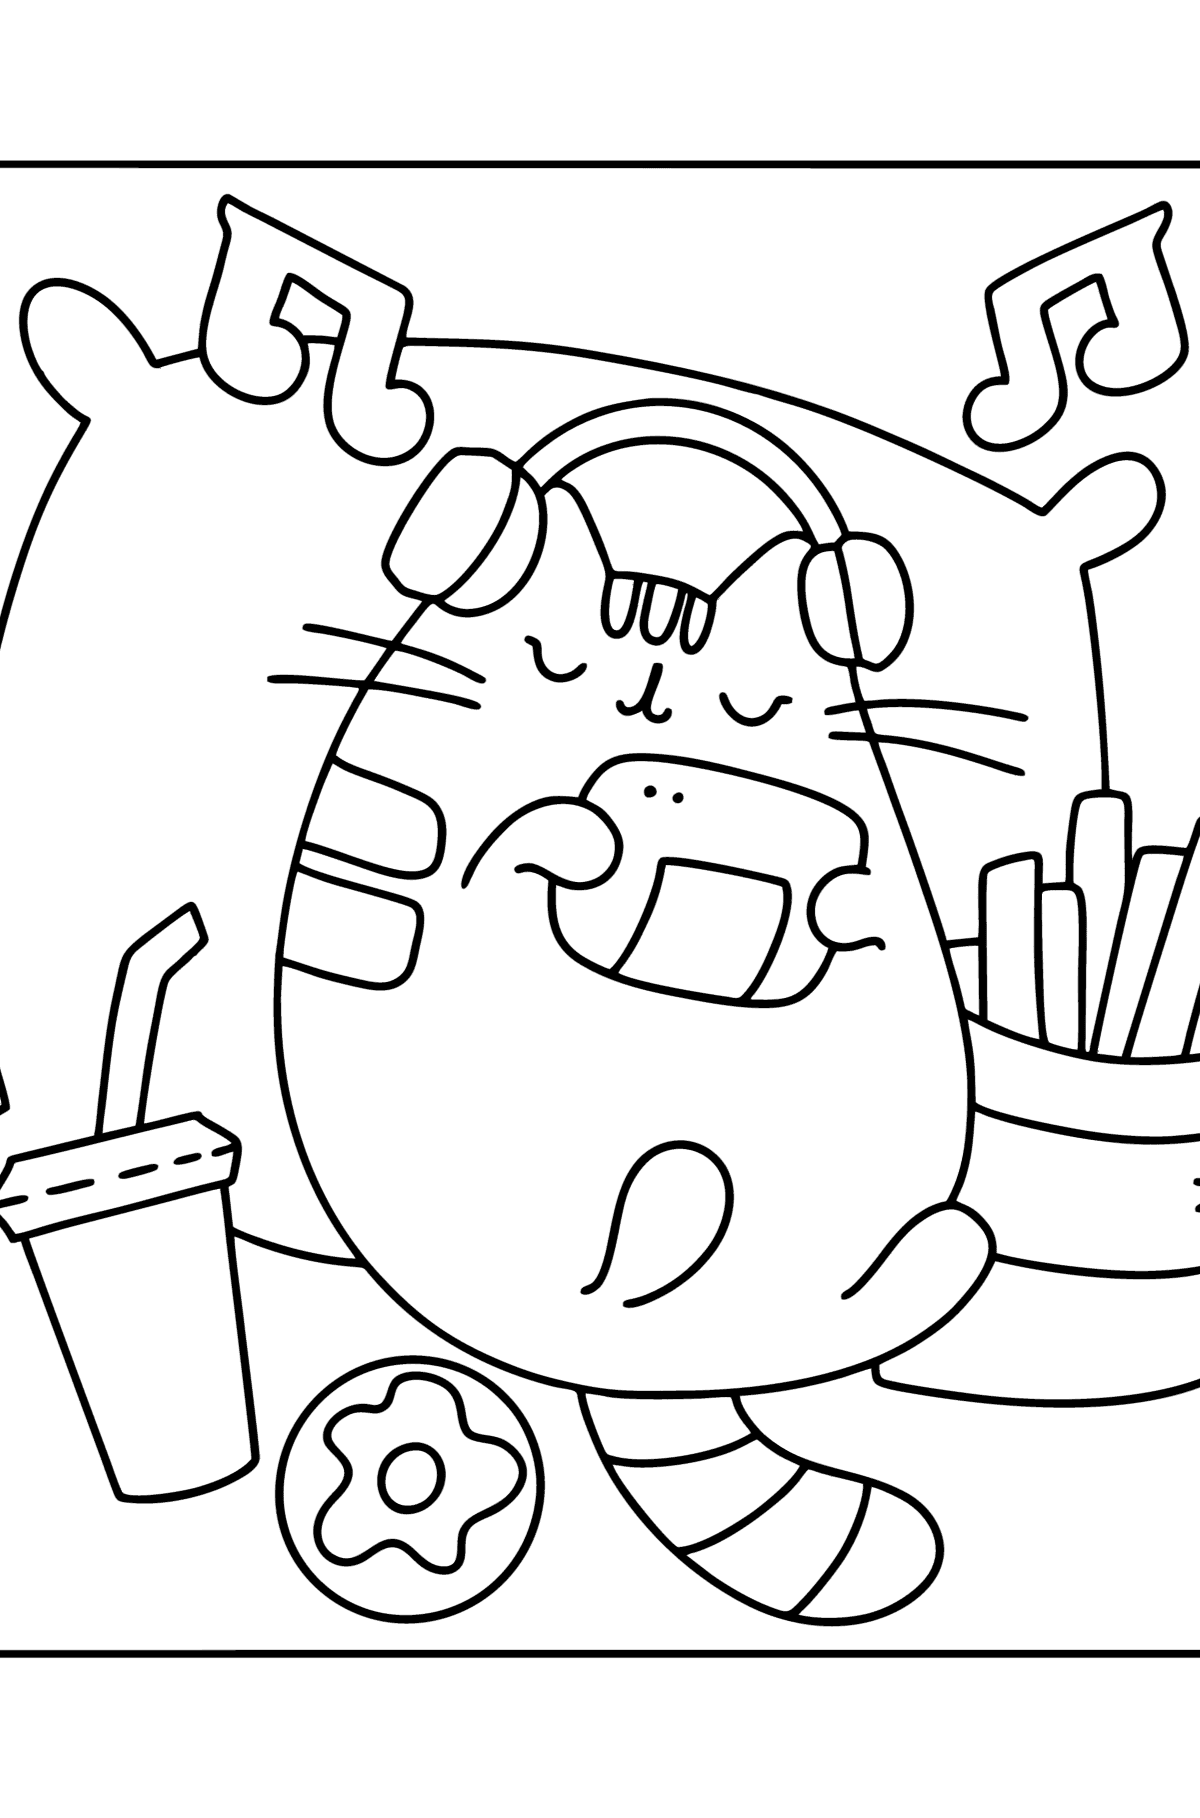 Happy pusheen сoloring page - Coloring Pages for Kids